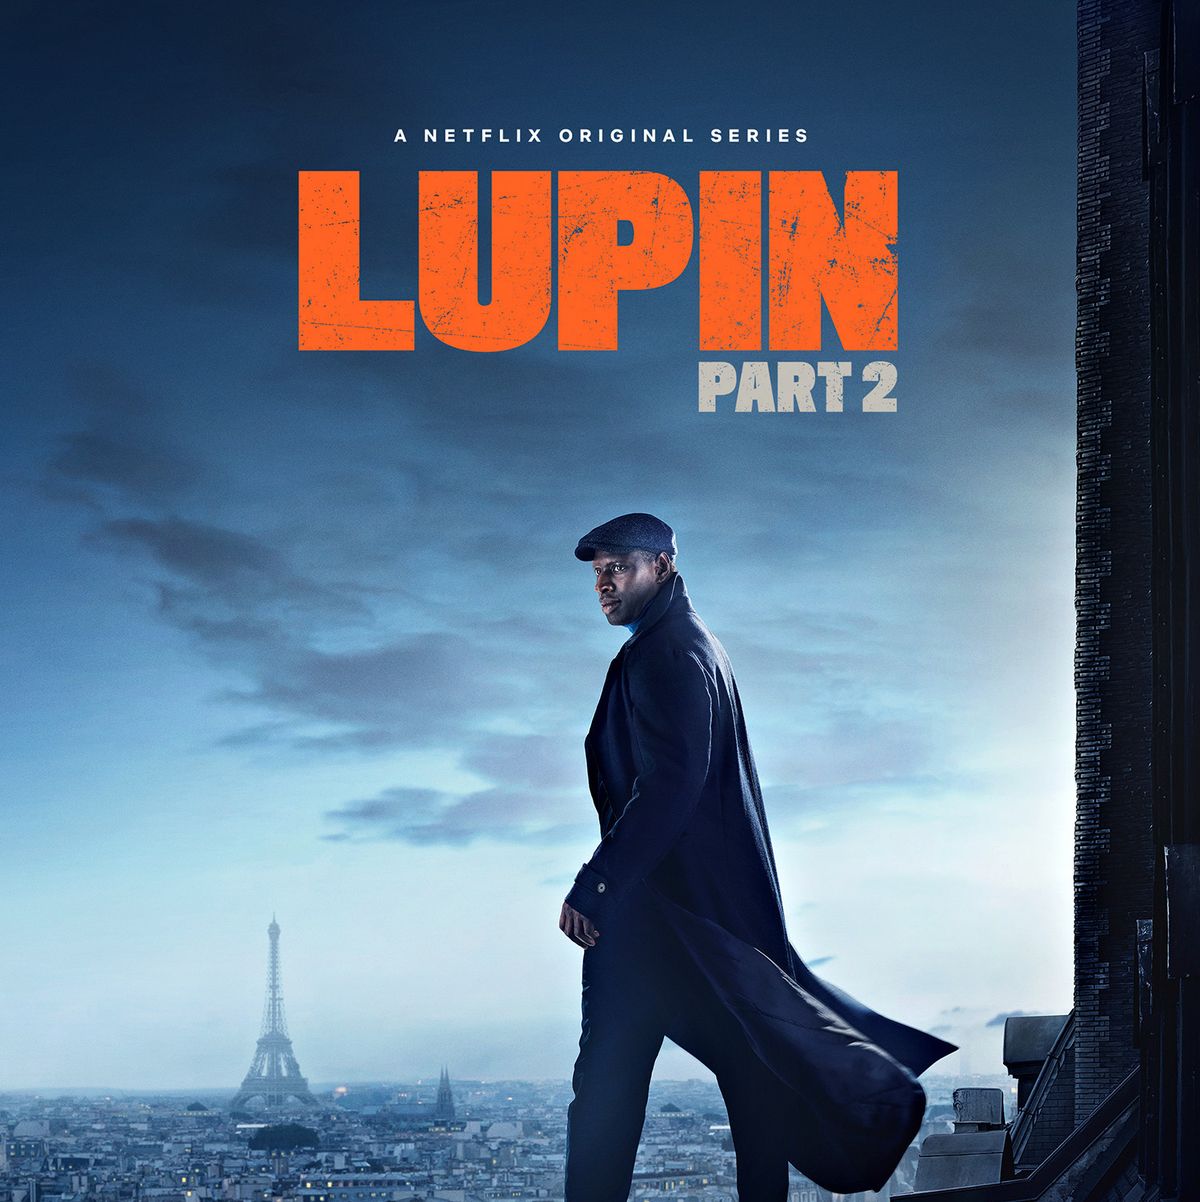 Lupin Season 3 - Release Date, Plot Spoilers, Cast News, and More